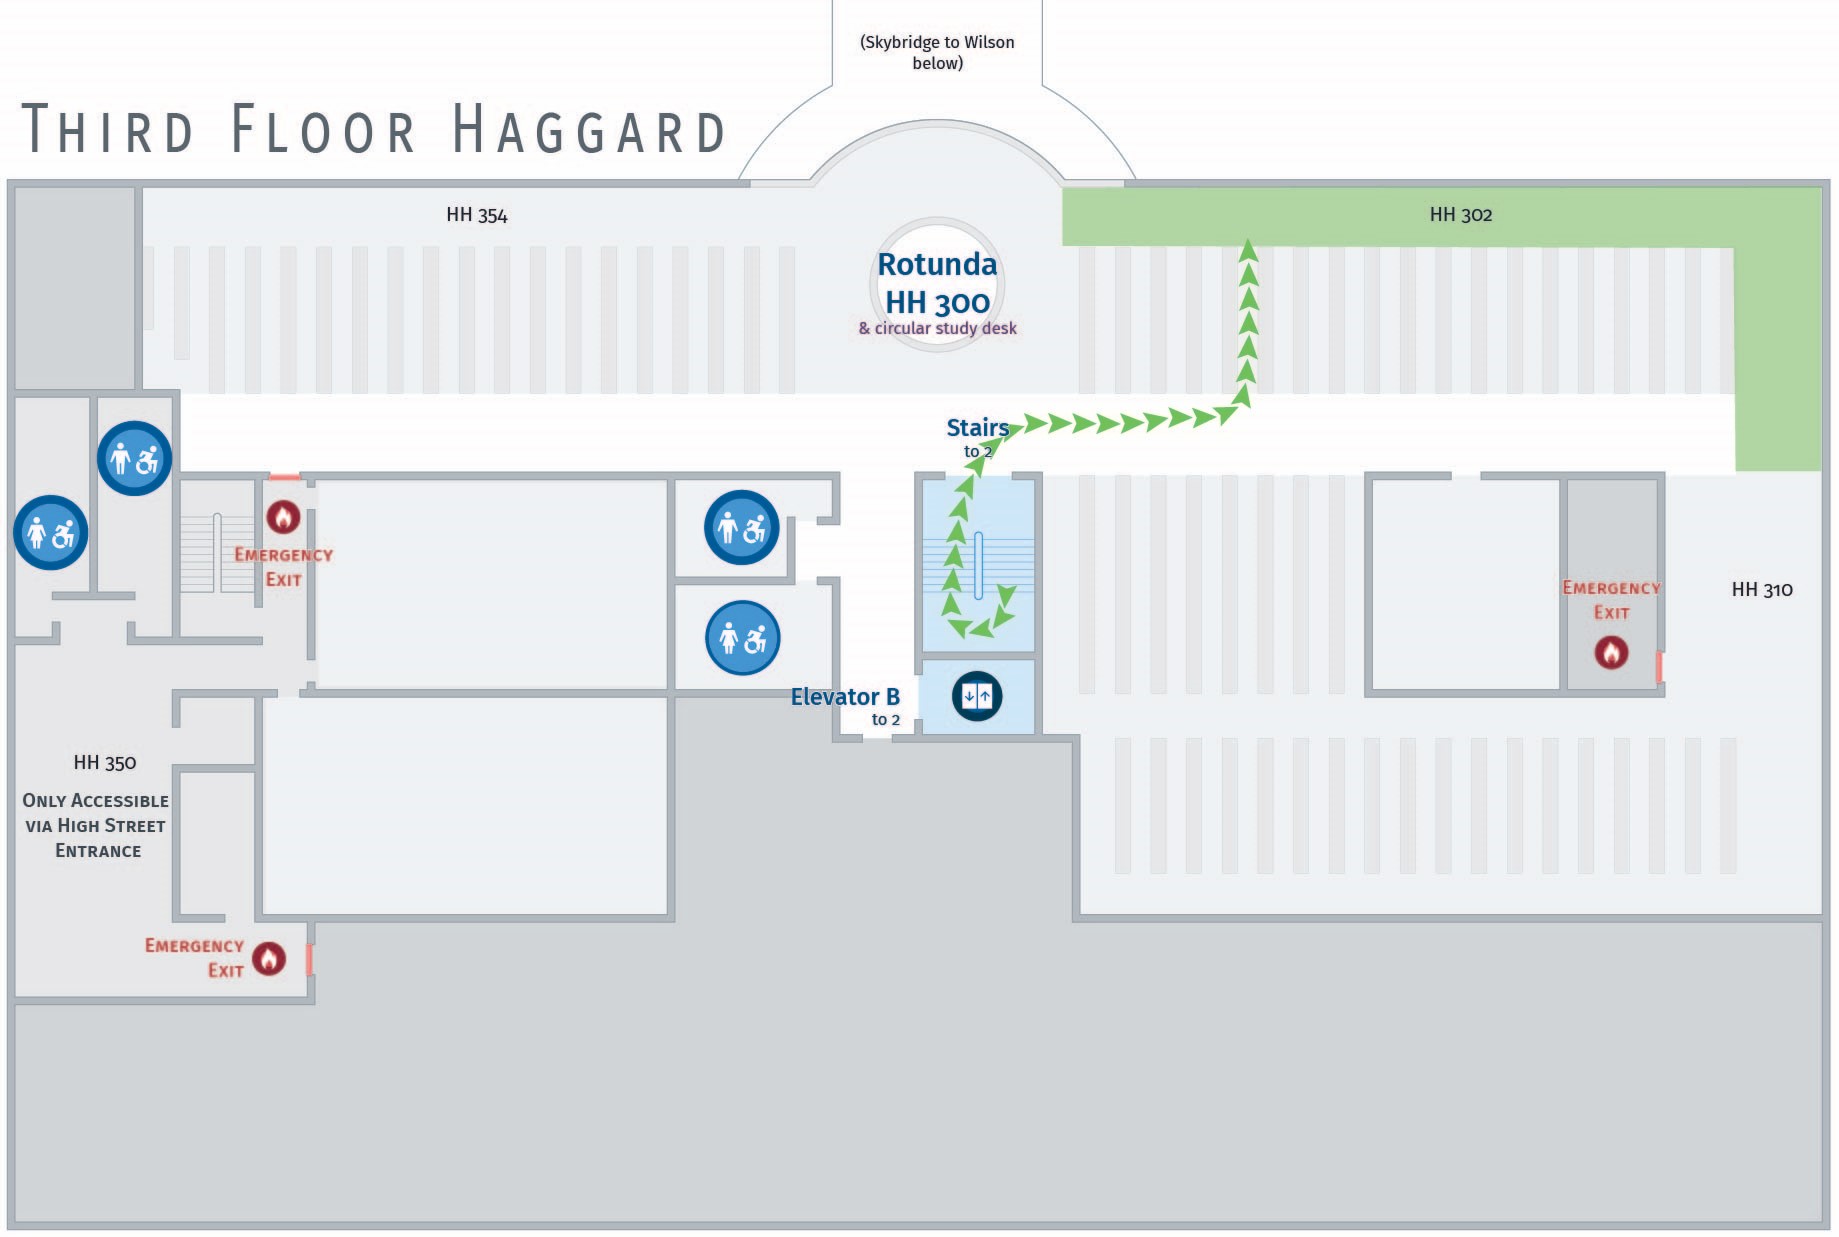 Floor plan, third floor of Haggard with path to HH 302.